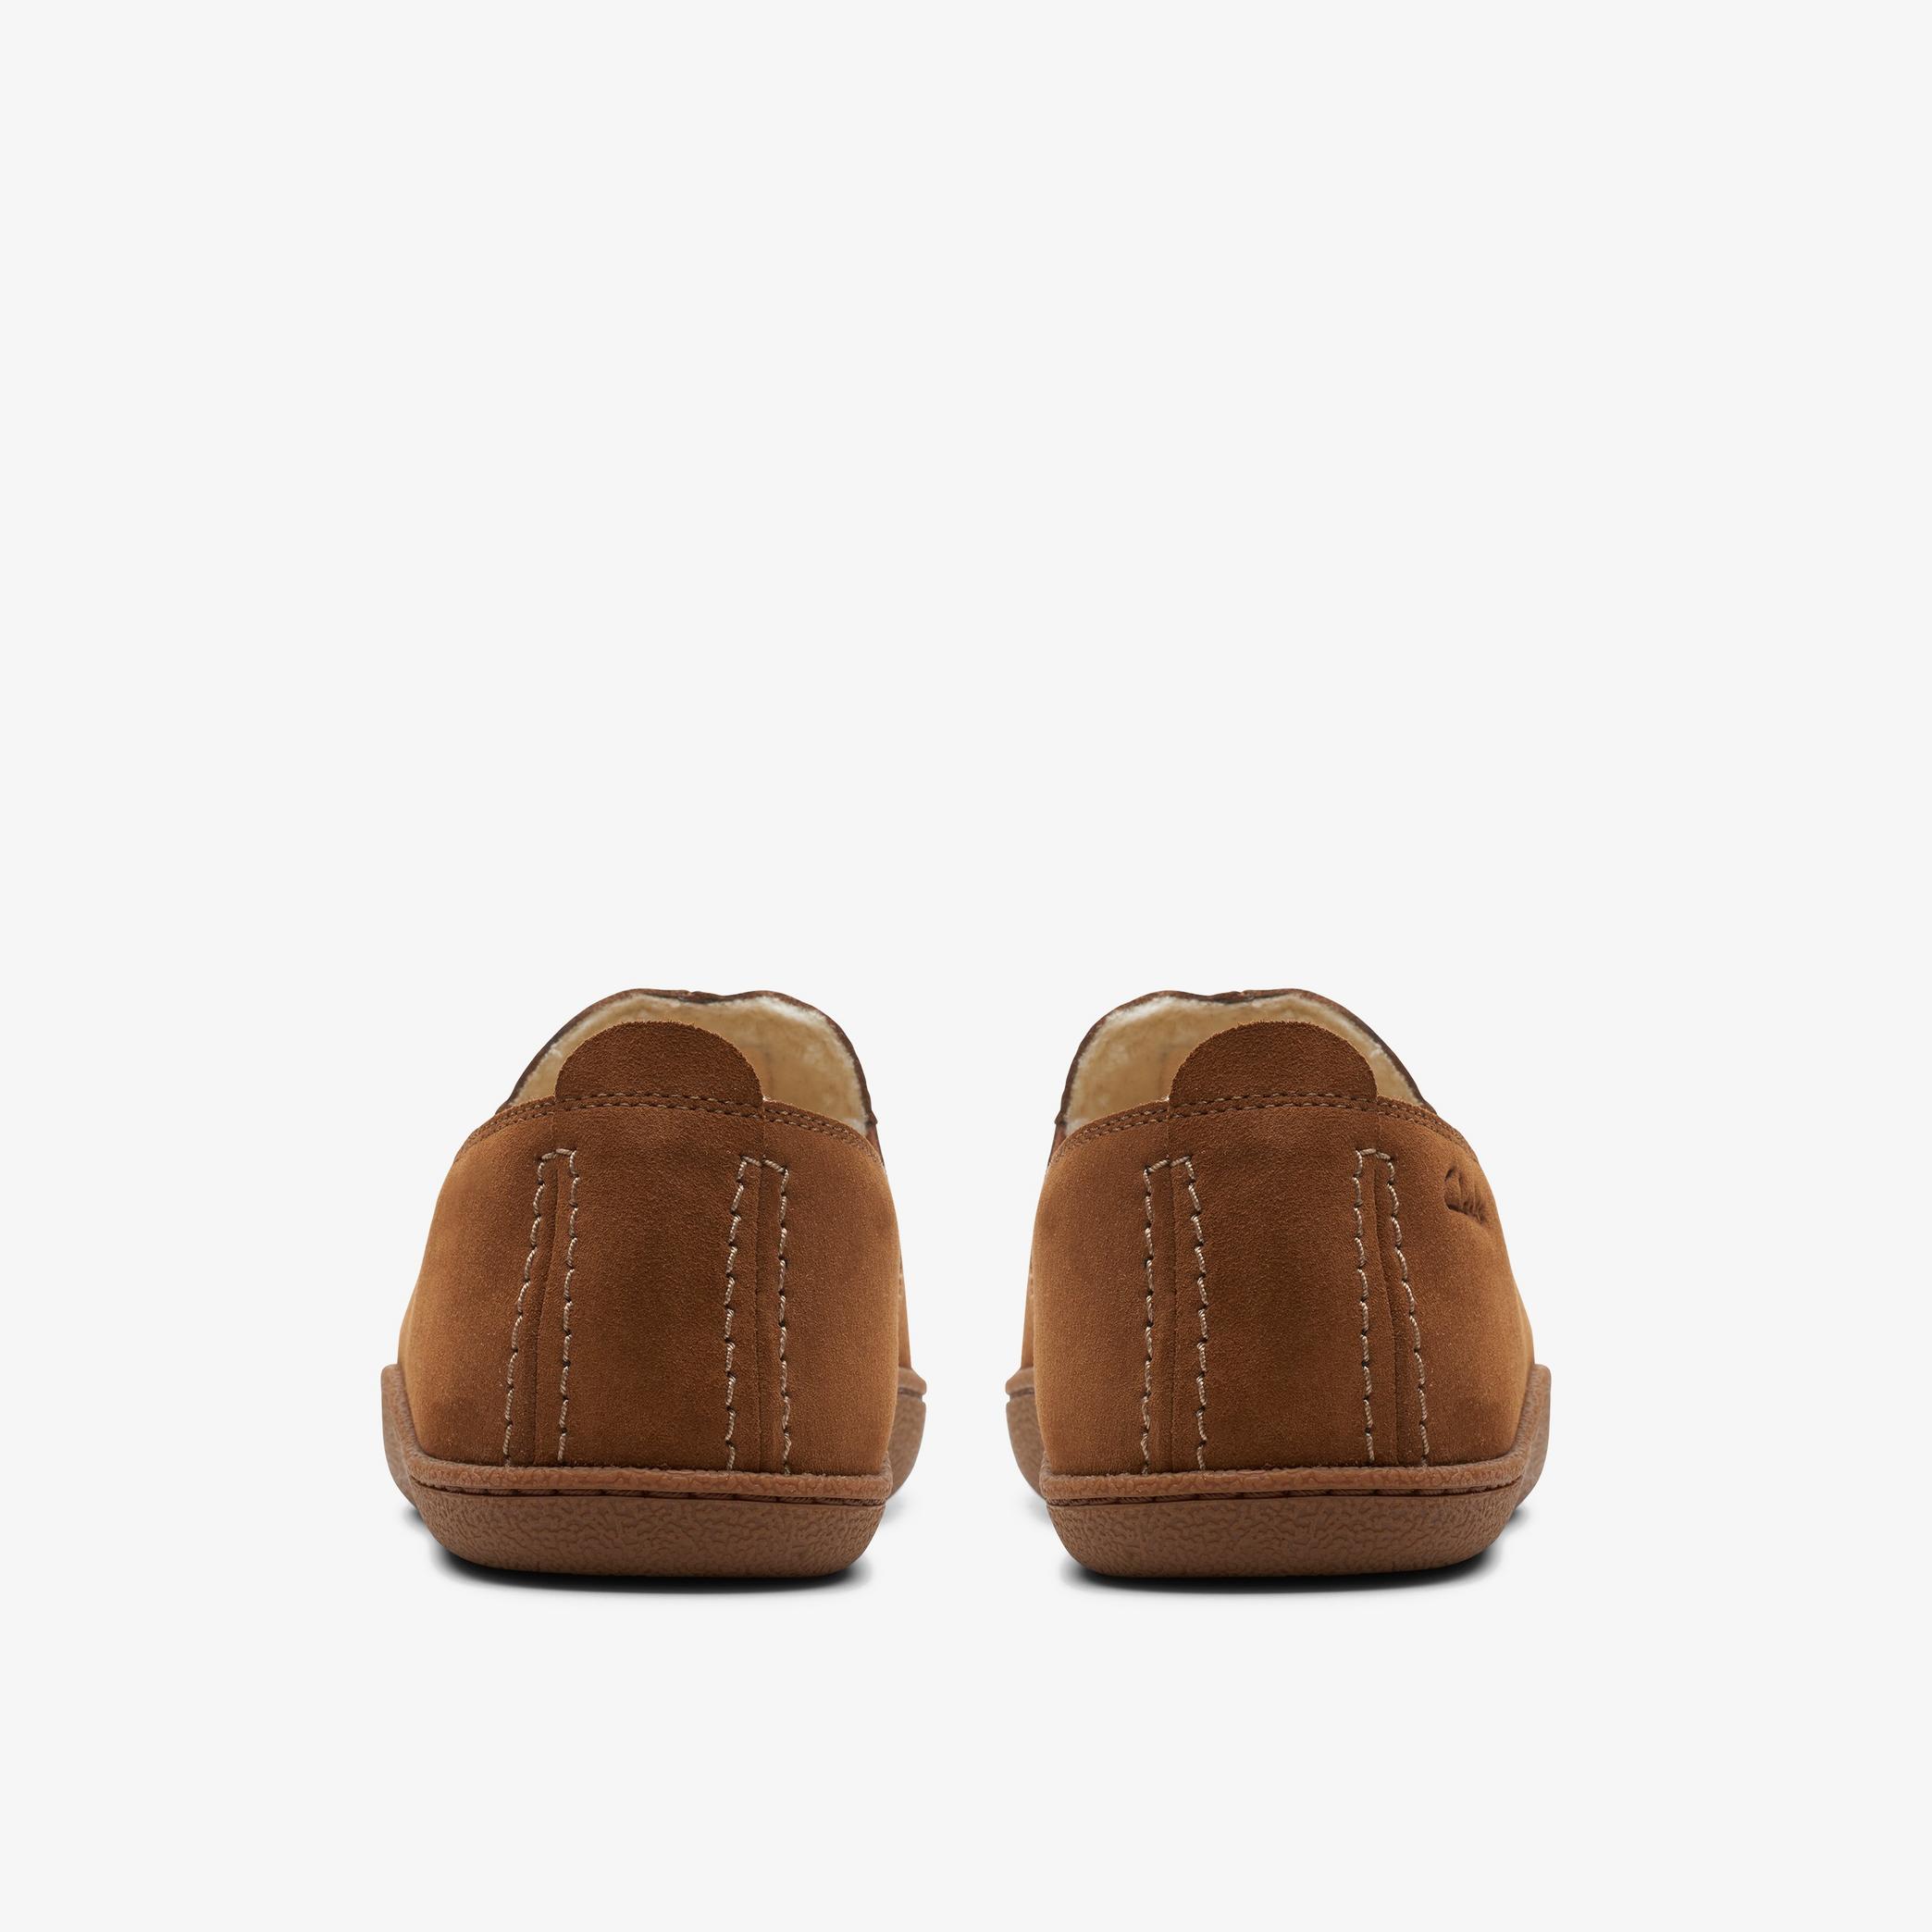 Home Mocc Tan Suede Slippers, view 5 of 6